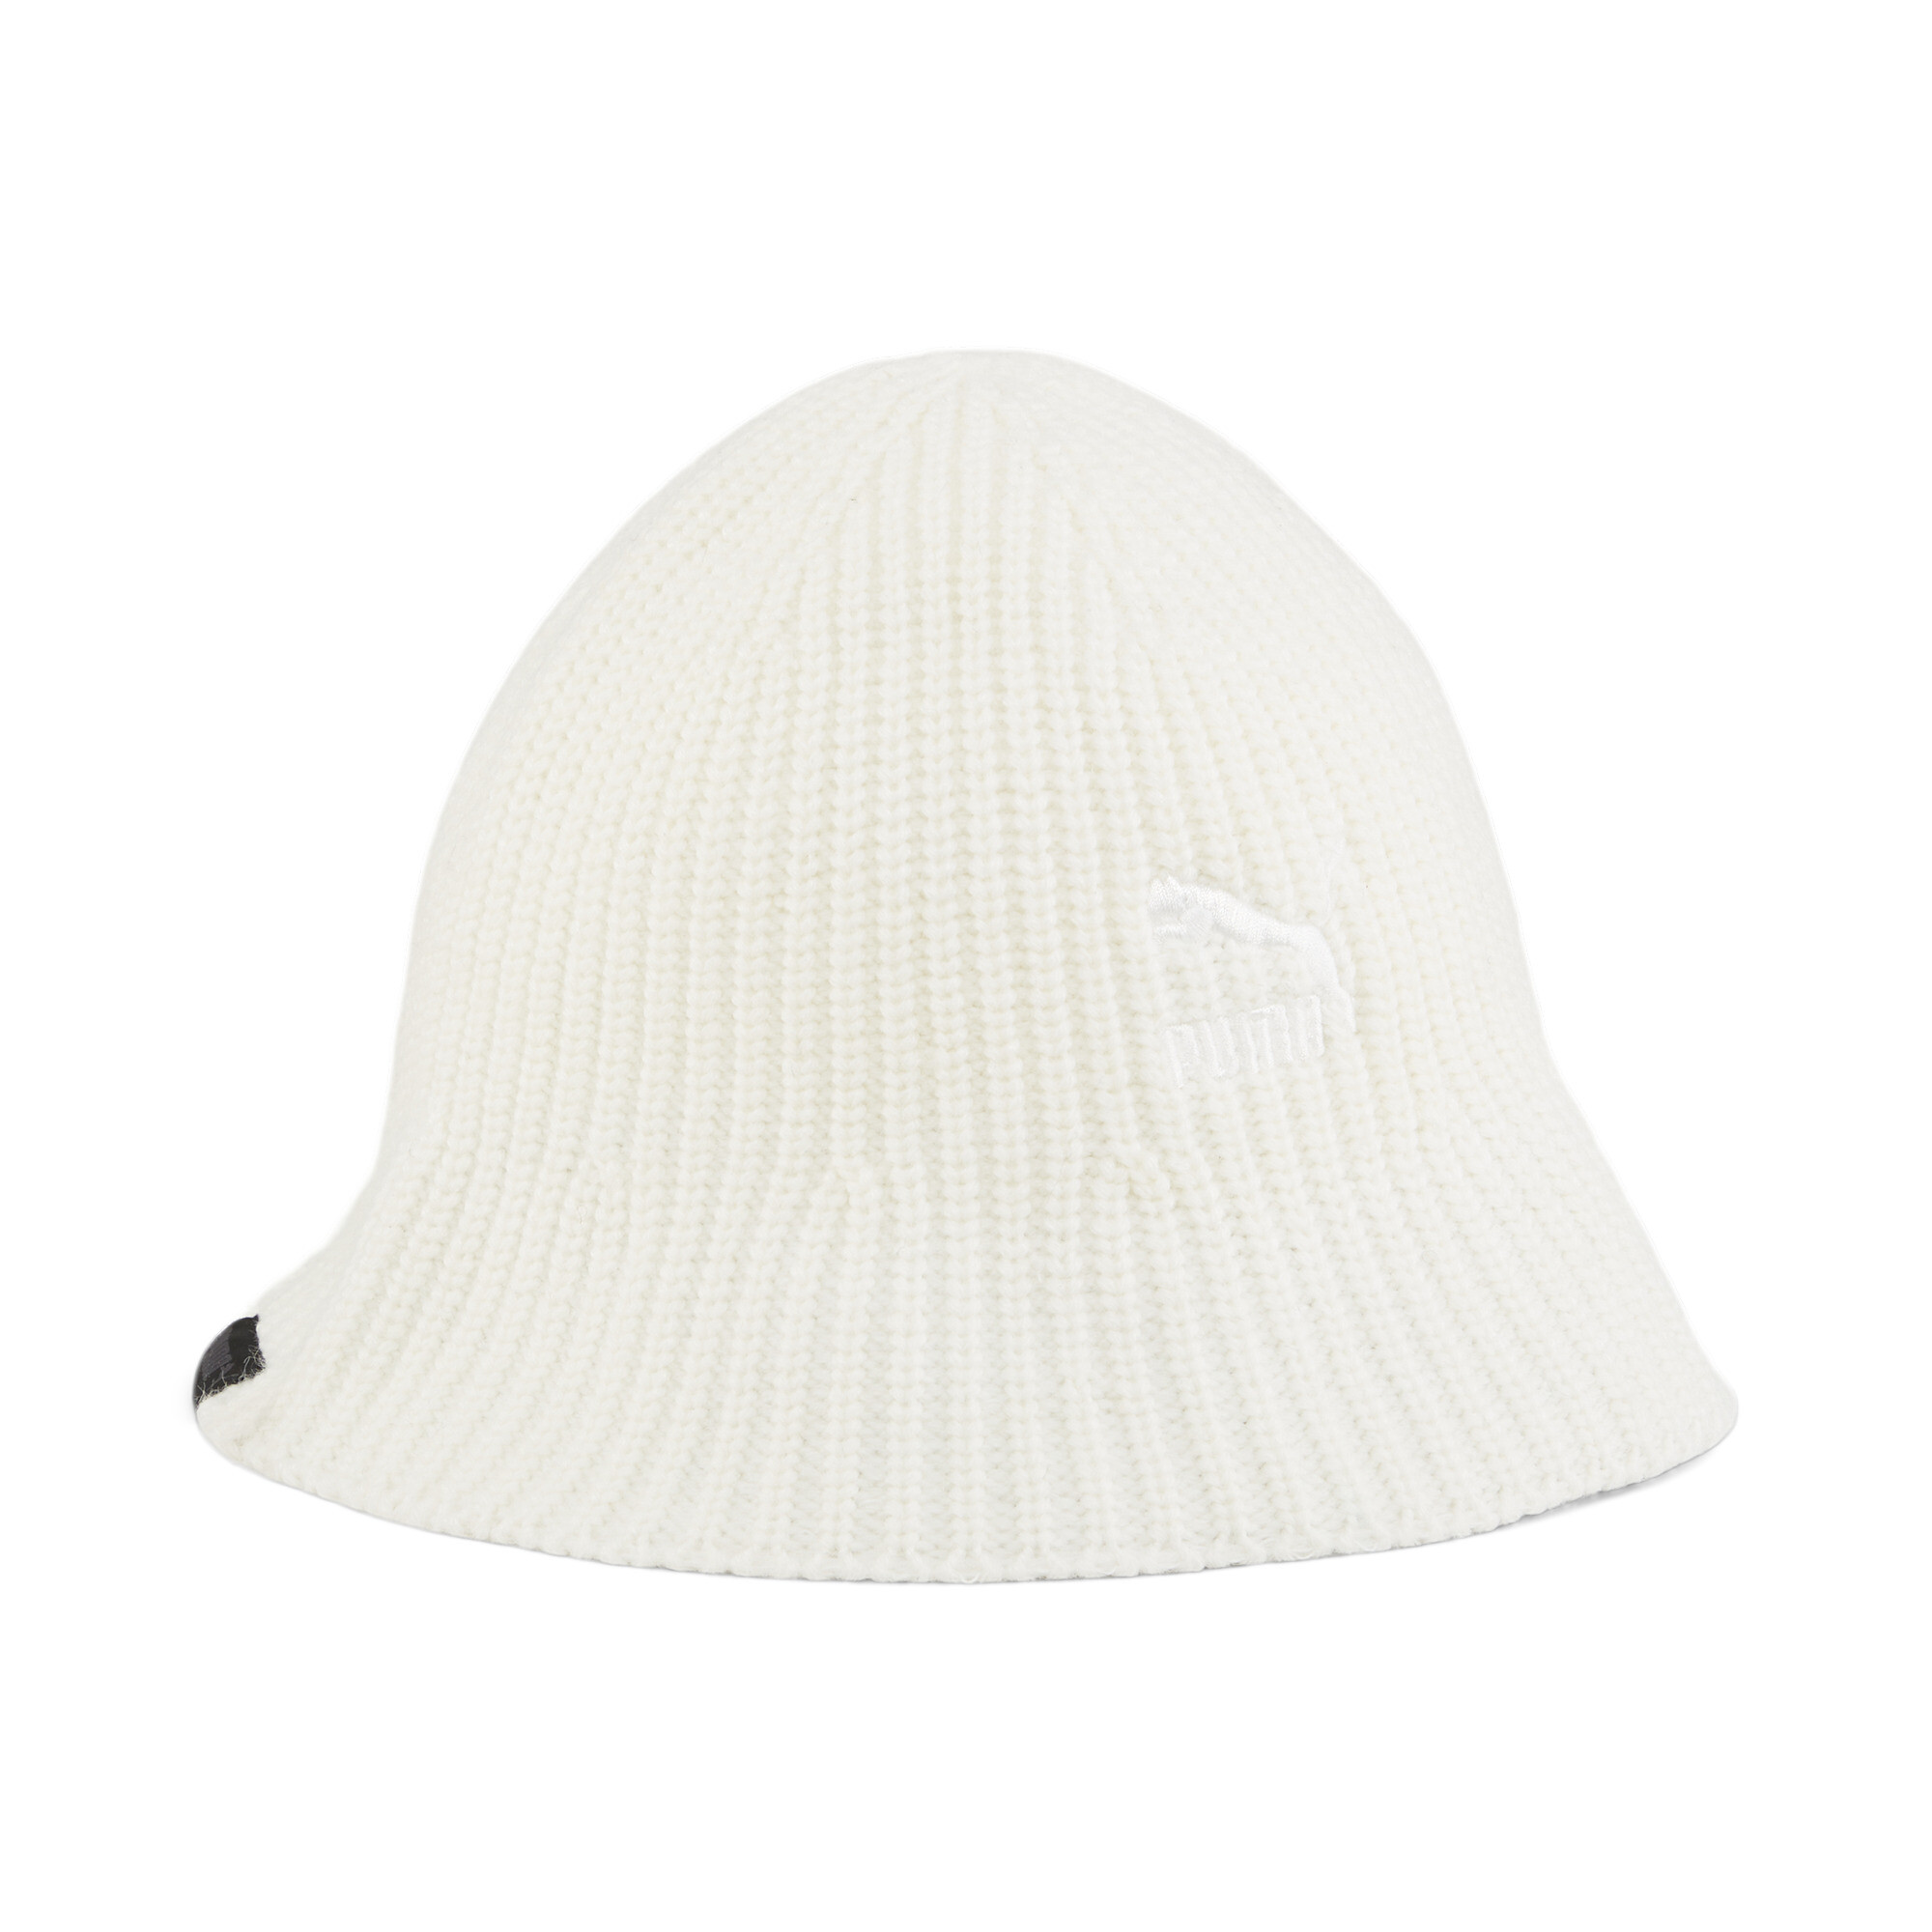 Men's PUMA PRIME Knitted Bucket Hat In White, Size Large